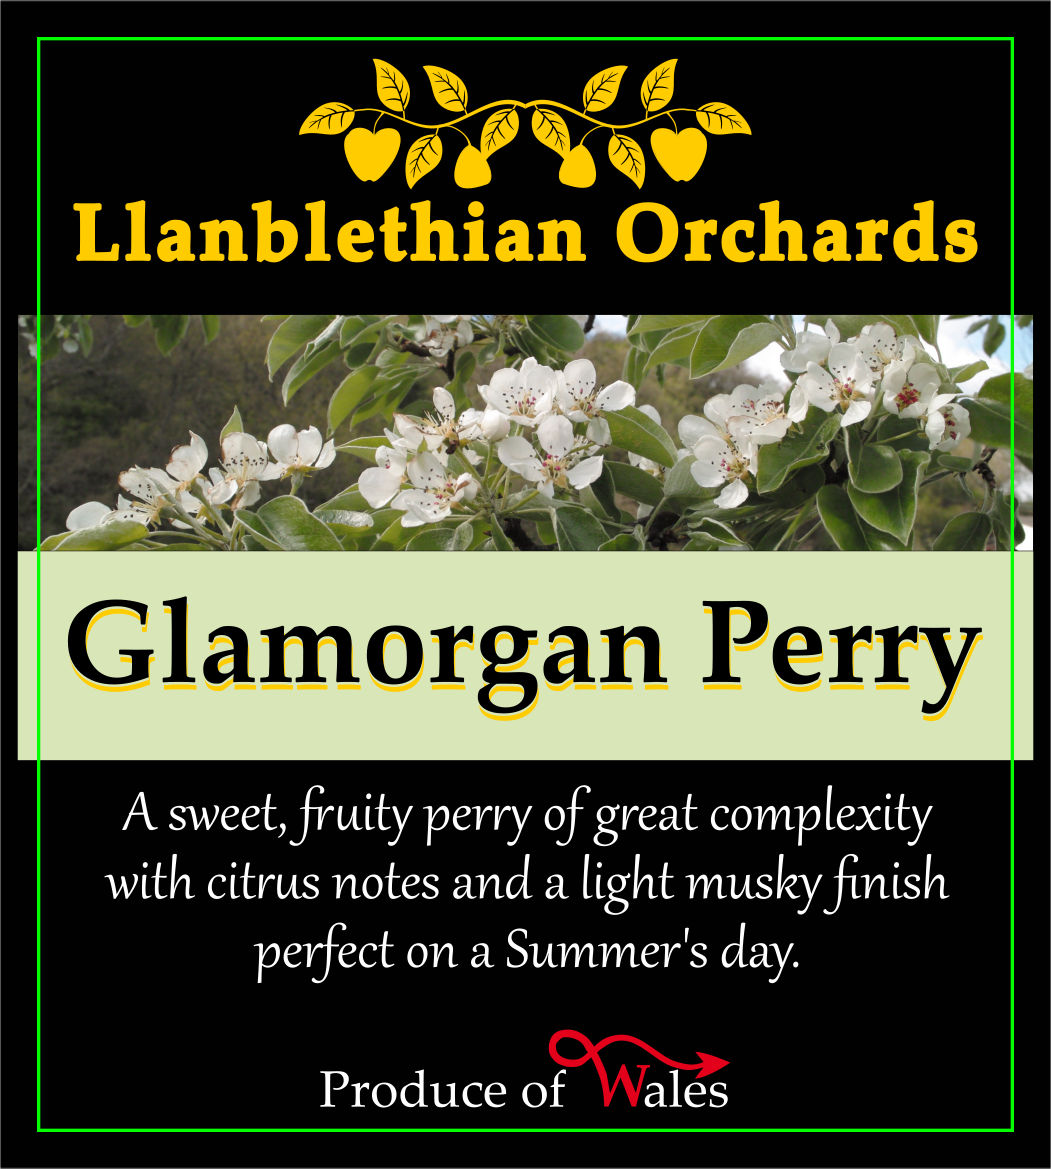 bottle label glamorgan perry branch logo is now in modern format llanblethian orchards cider